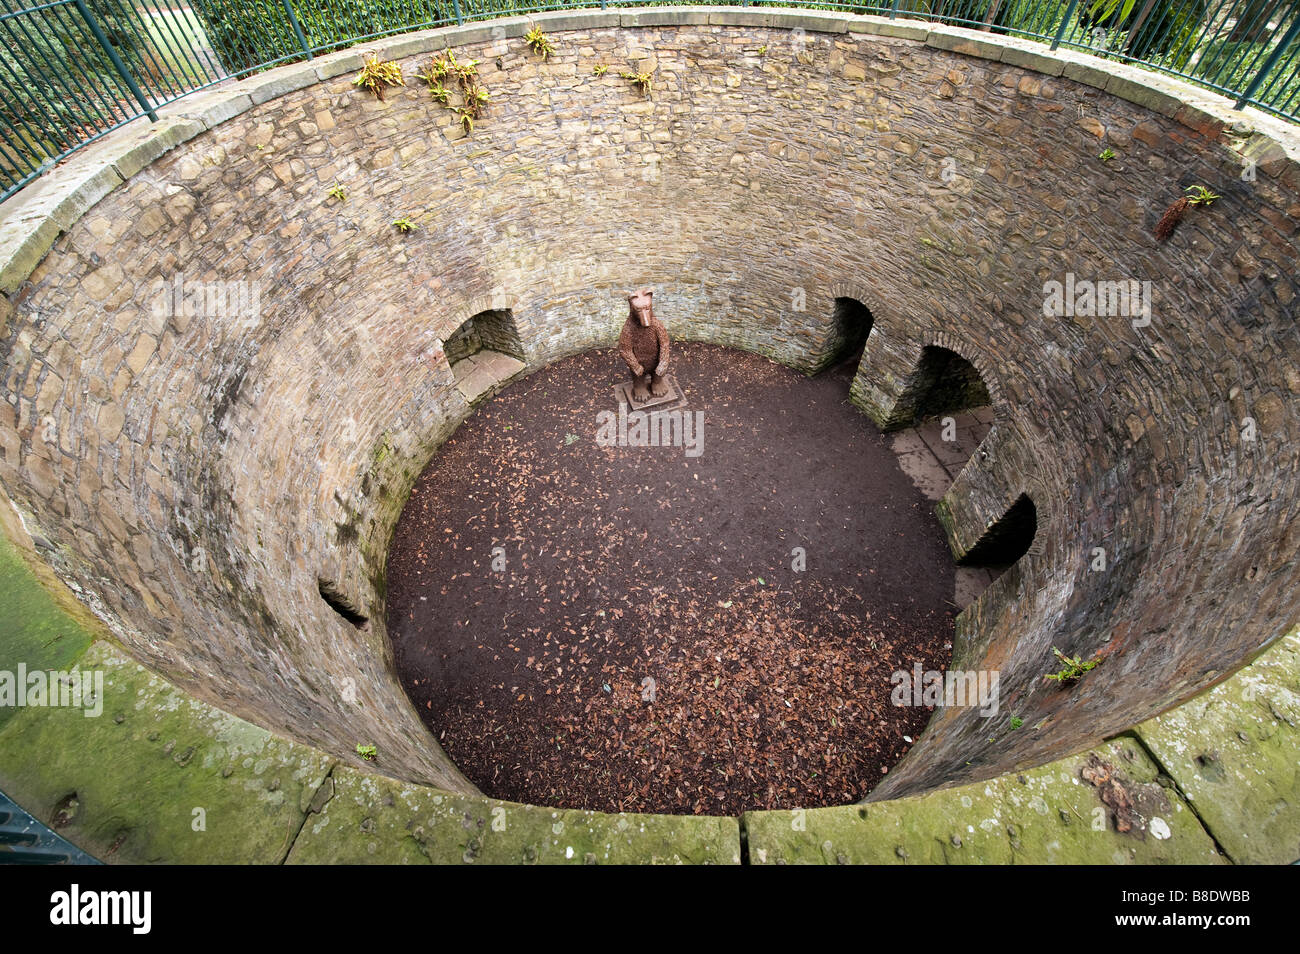 Bear pit in The 'Botanical Gardens 'in Sheffield in England 'Great Britain' Stock Photo